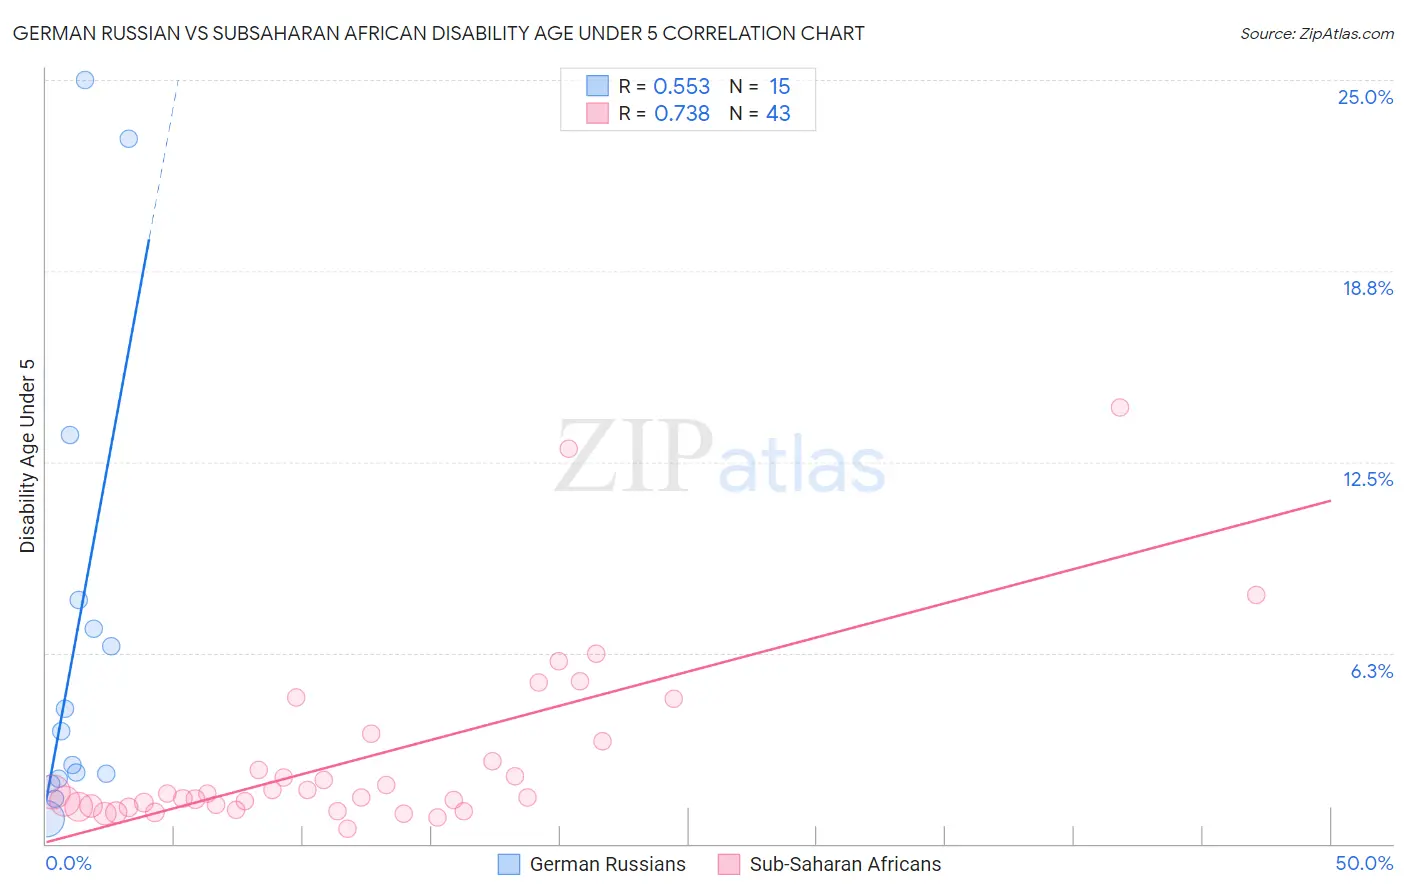 German Russian vs Subsaharan African Disability Age Under 5